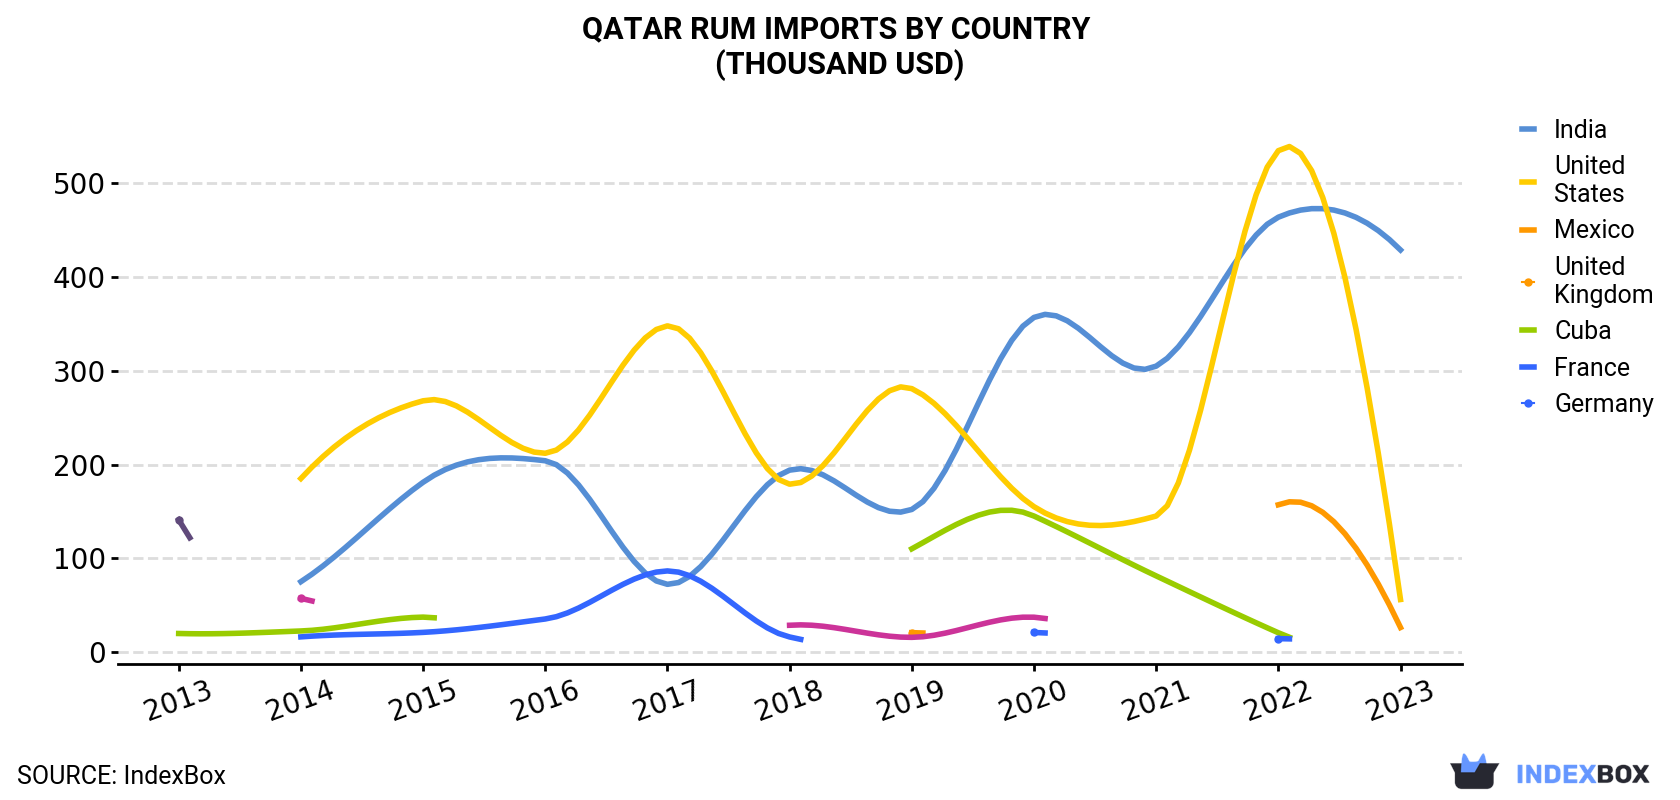 Qatar Rum Imports By Country (Thousand USD)